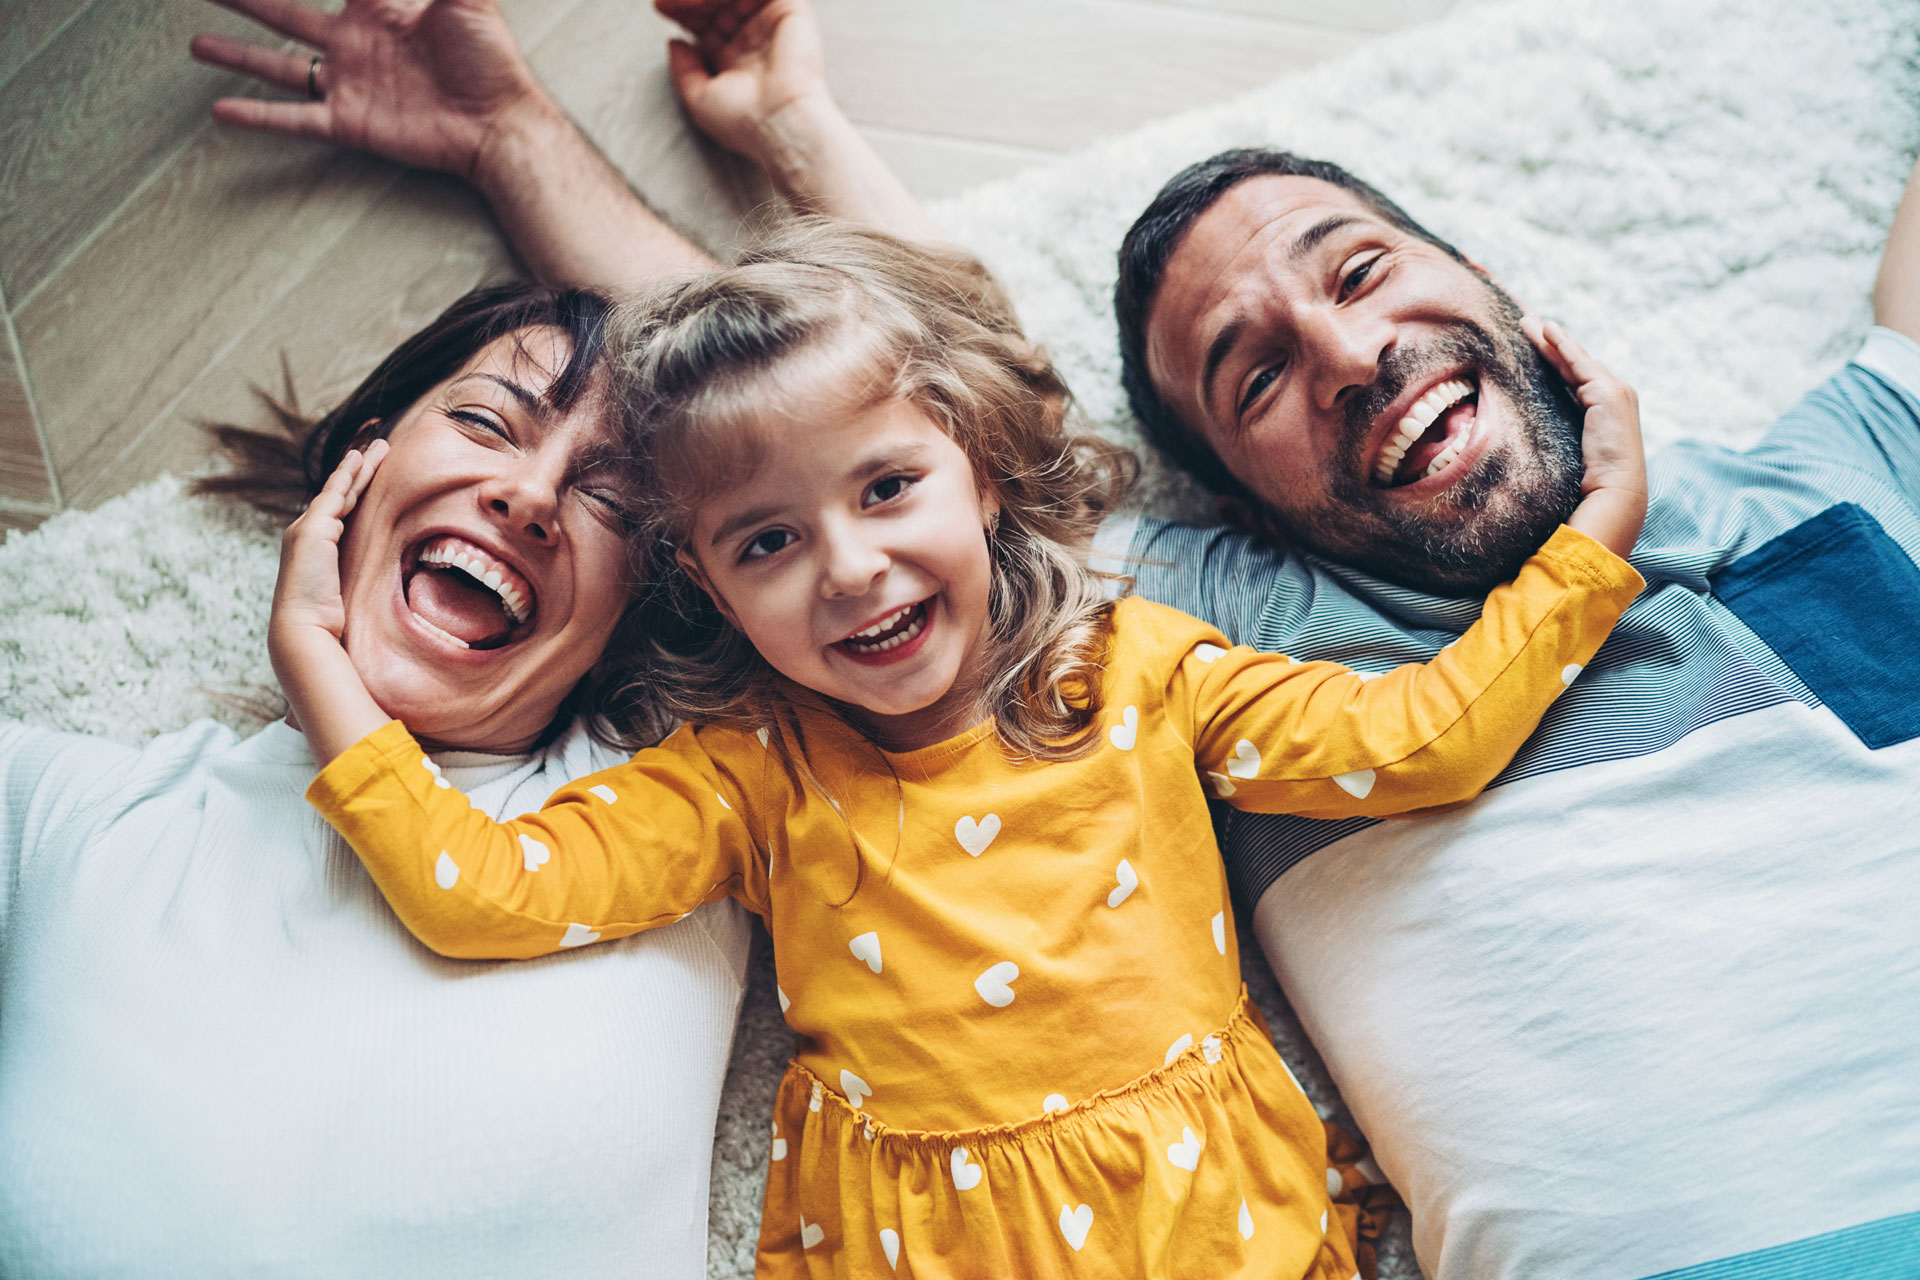 Mother and Father with daughter smiling and laughing on the floor